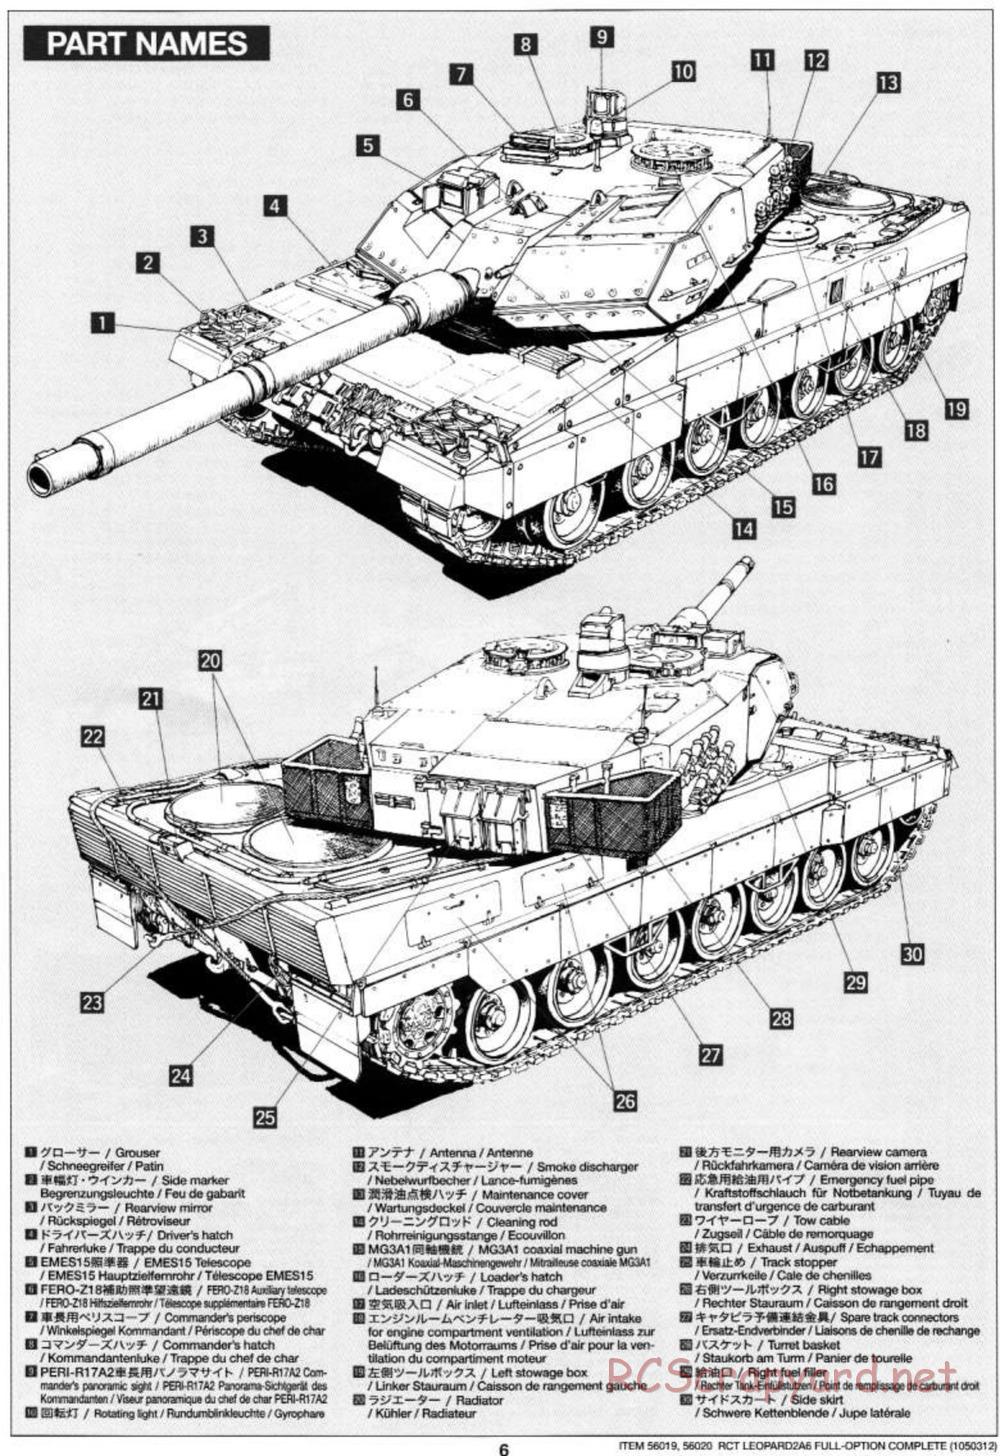 Tamiya - Leopard 2 A6 - 1/16 Scale Chassis - Manual - Page 6